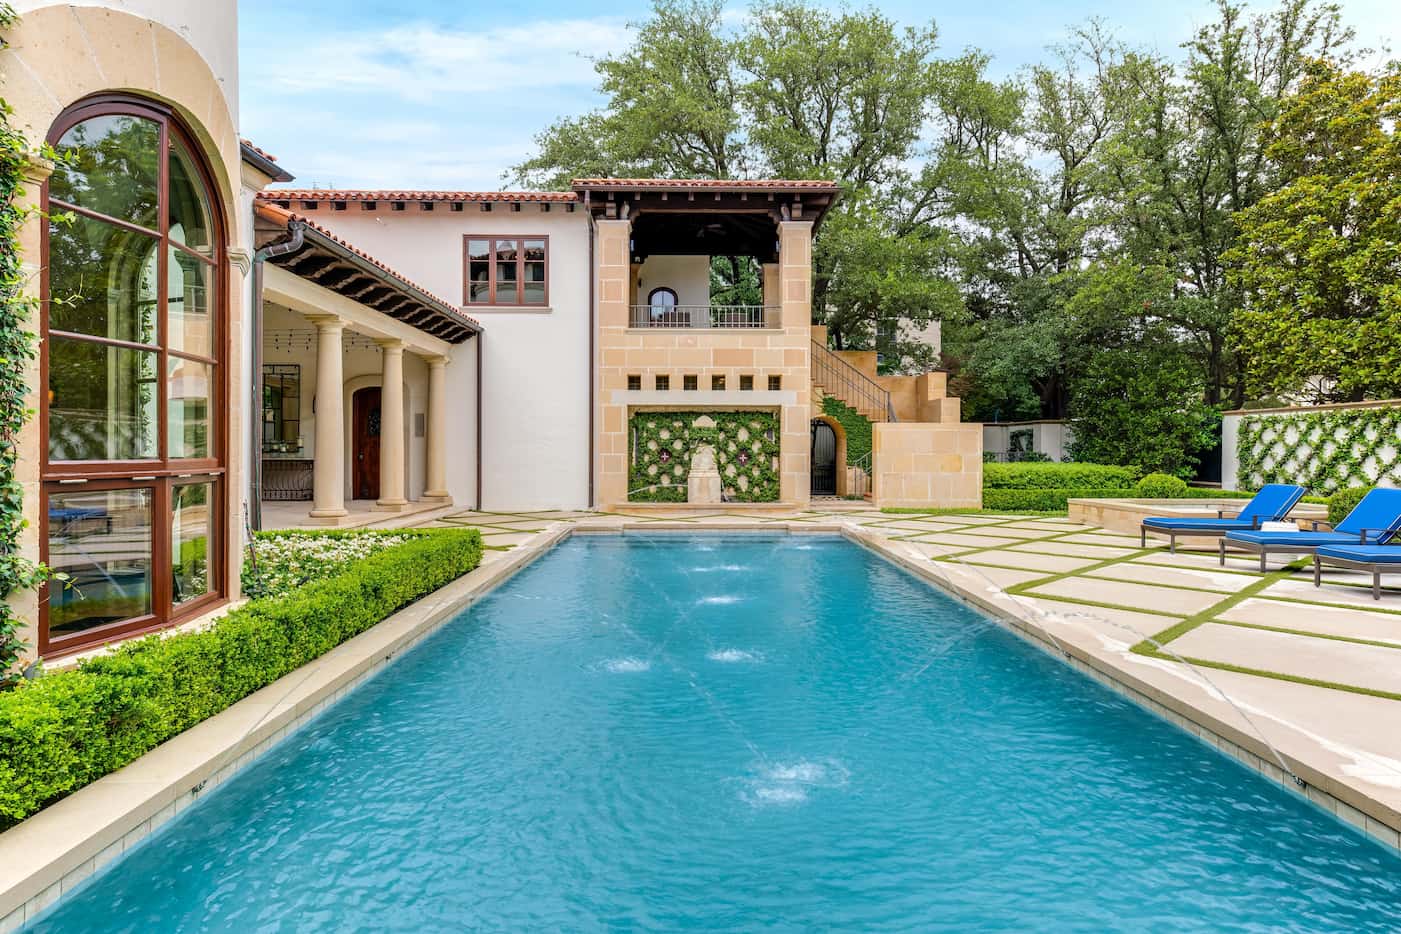 A nearly $16 million Highland Park estate was the most expensive home listed in Texas this...